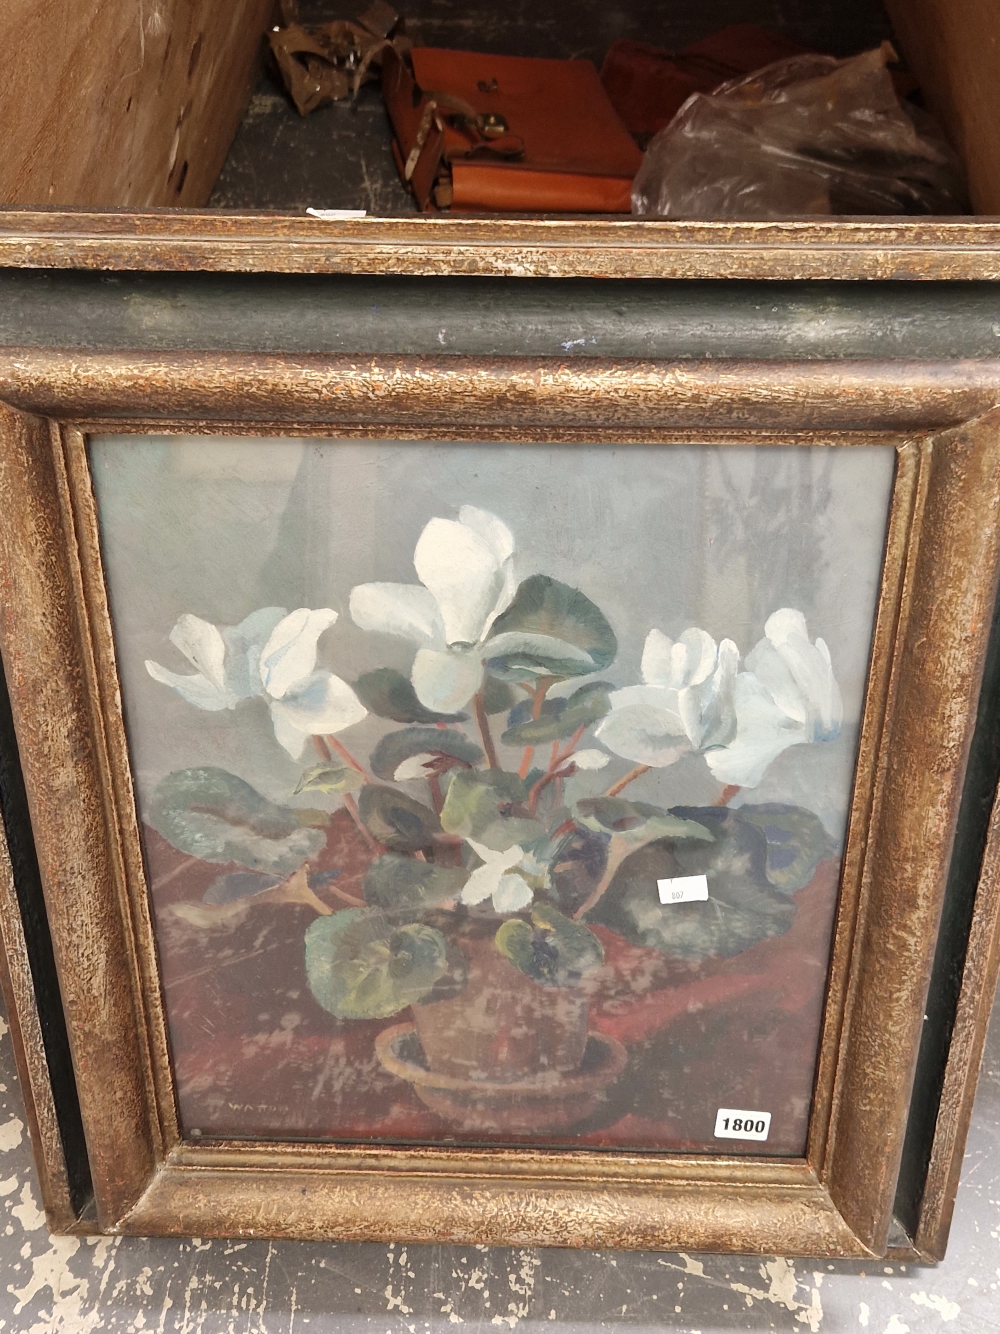 20th CENTURY SCHOOL A STILL LIFE OF FLOWERS IN A ROWLEY GALLERY FRAME WITH A LANDSCAPE VERSO, SIGNED